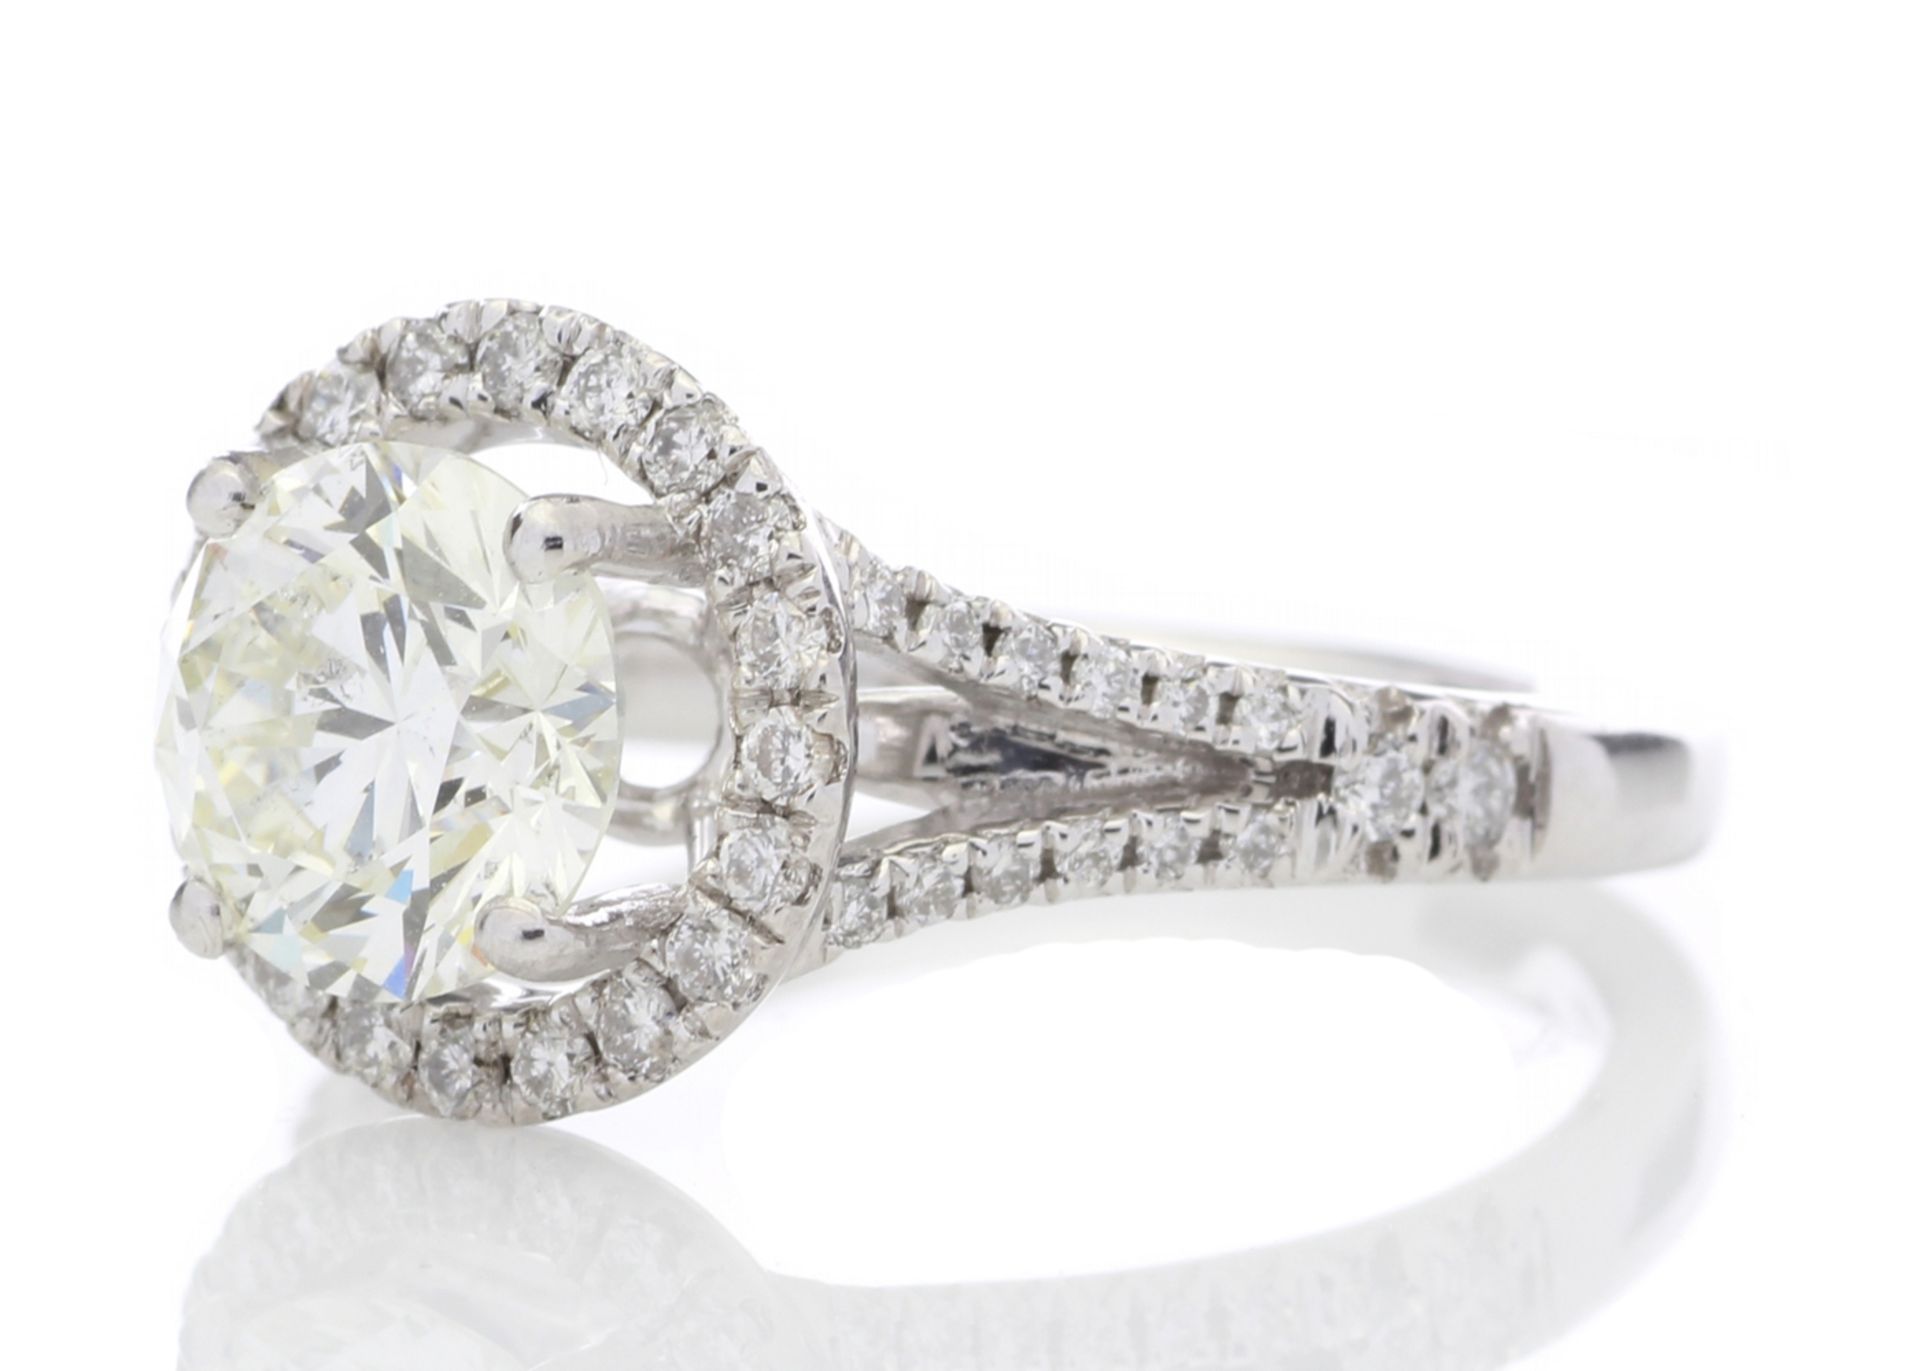 18ct White Gold Single Stone With Halo Setting Ring (1.64) 1.98 Carats - Valued by GIE £80,000. - Image 2 of 5